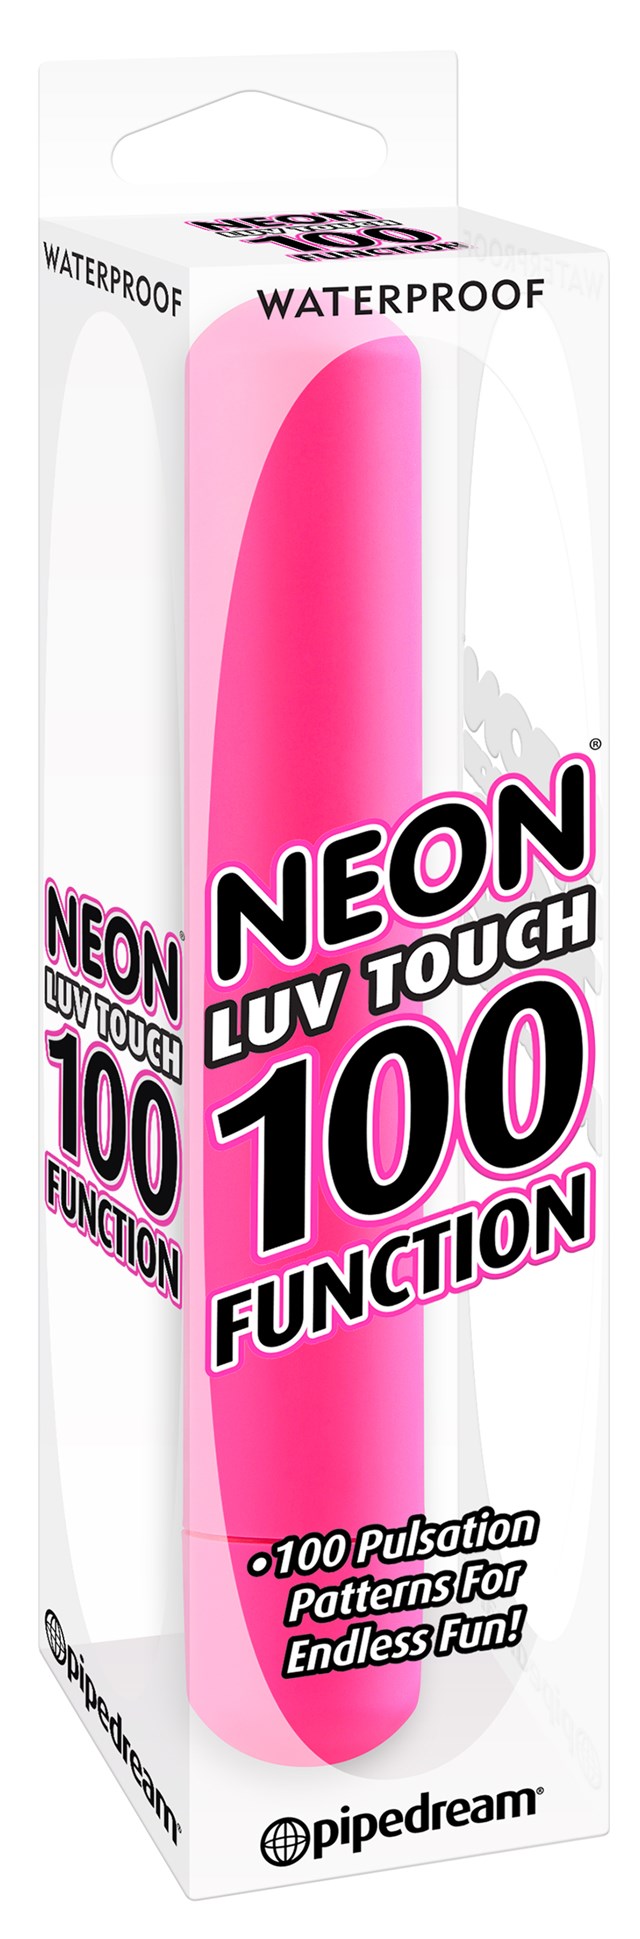 Neon Luv Touch 100-function